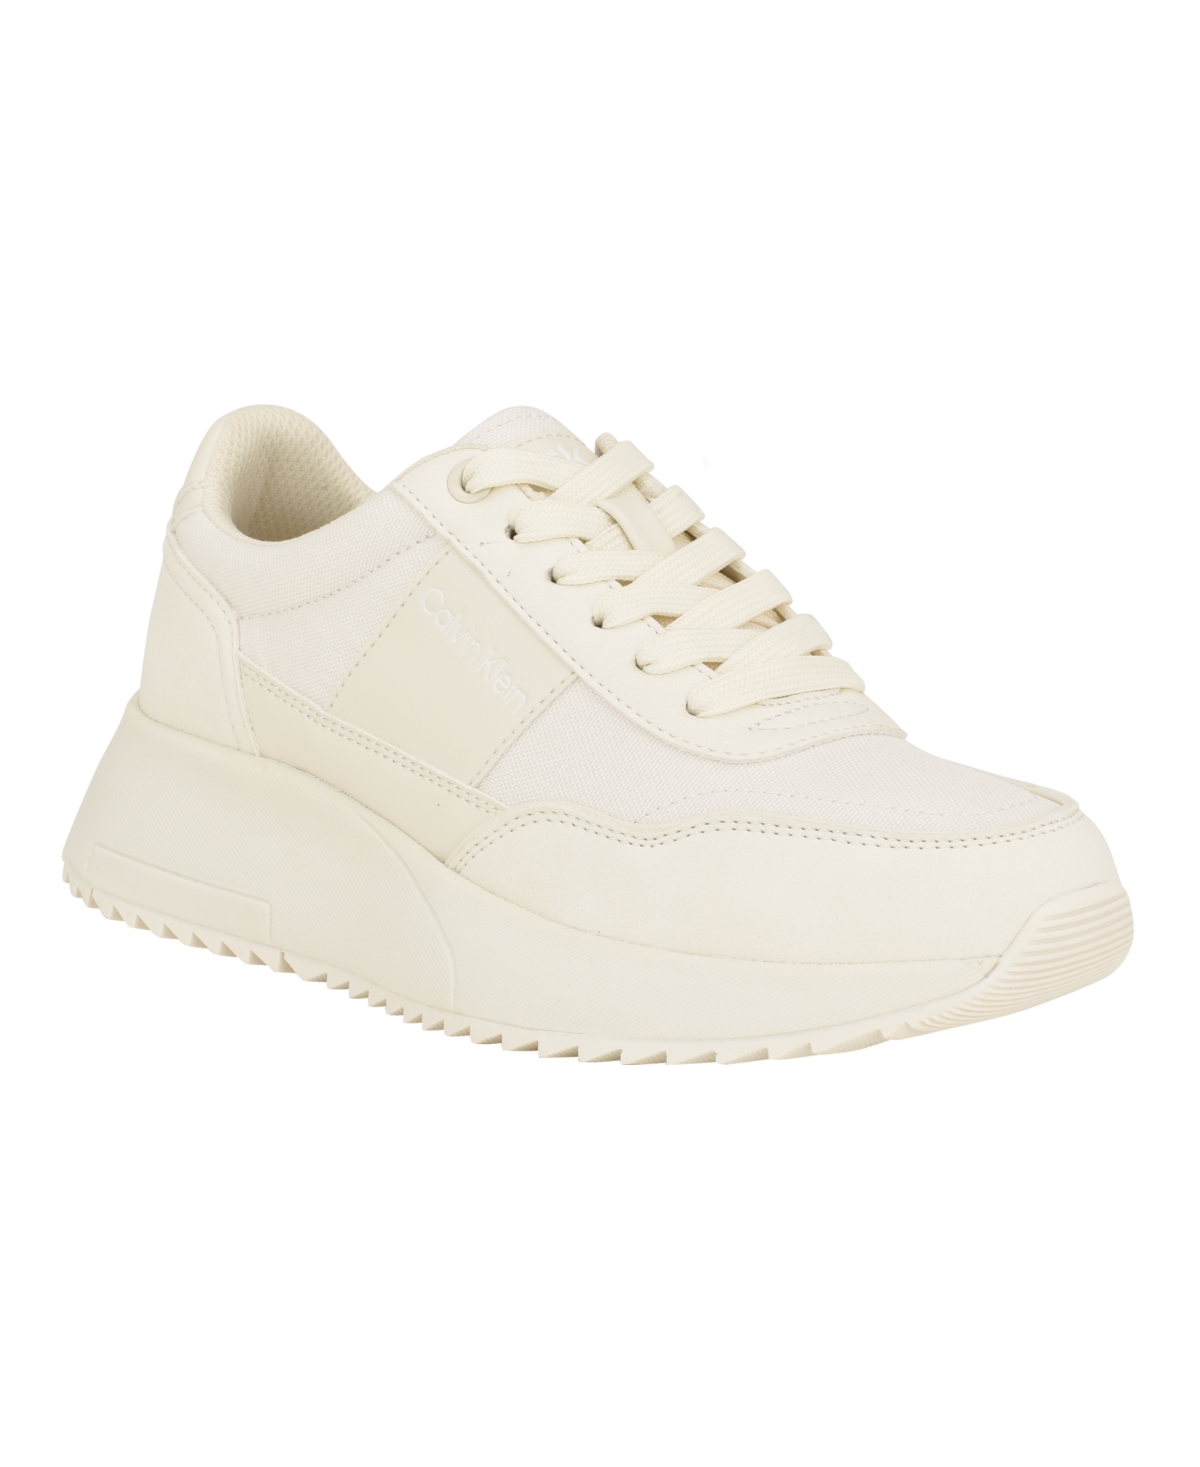 Calvin Klein Women's Pippy Lace-up Platform Casual Sneakers In Ivory Multi